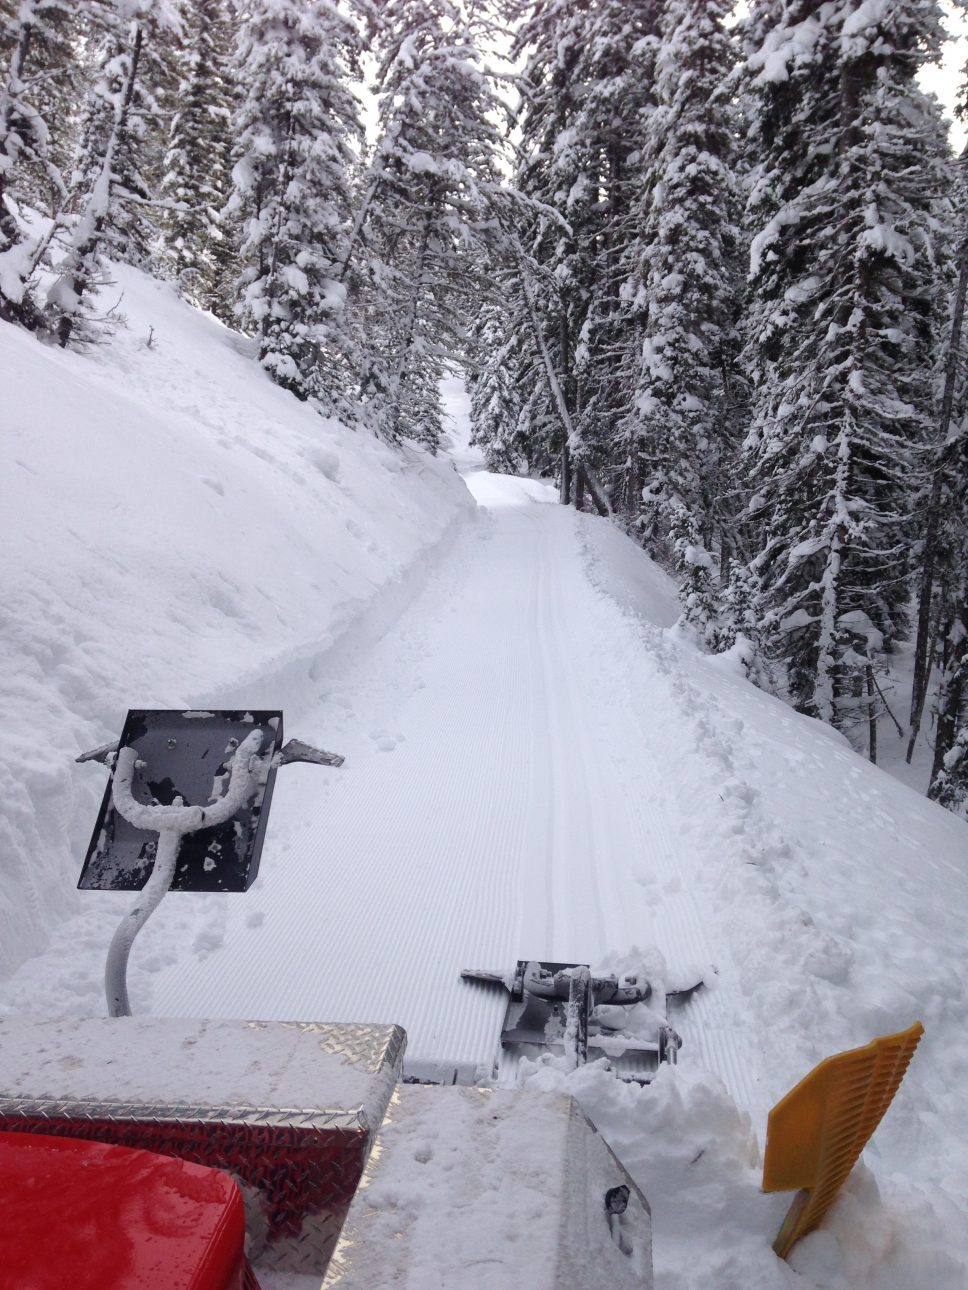 Jackson Hole Nordic - Image of machine grooming cross country ski trails